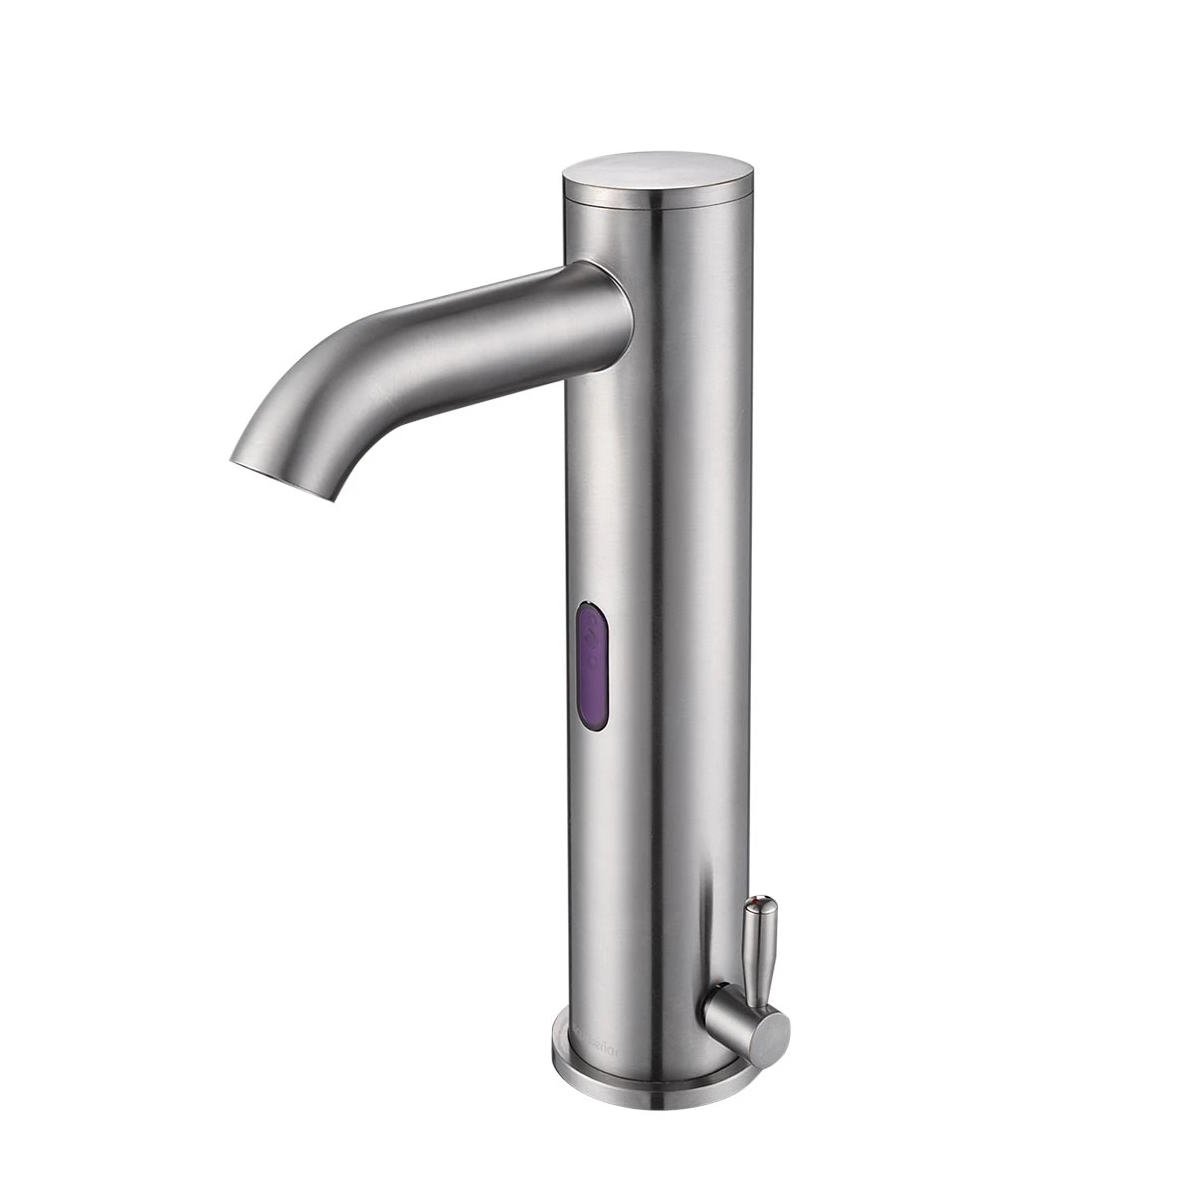 Brushed Nickel Cupc Single Handle Deck Mounted Automatic Sensor Tap Touchless Sensor Faucet J12-BN